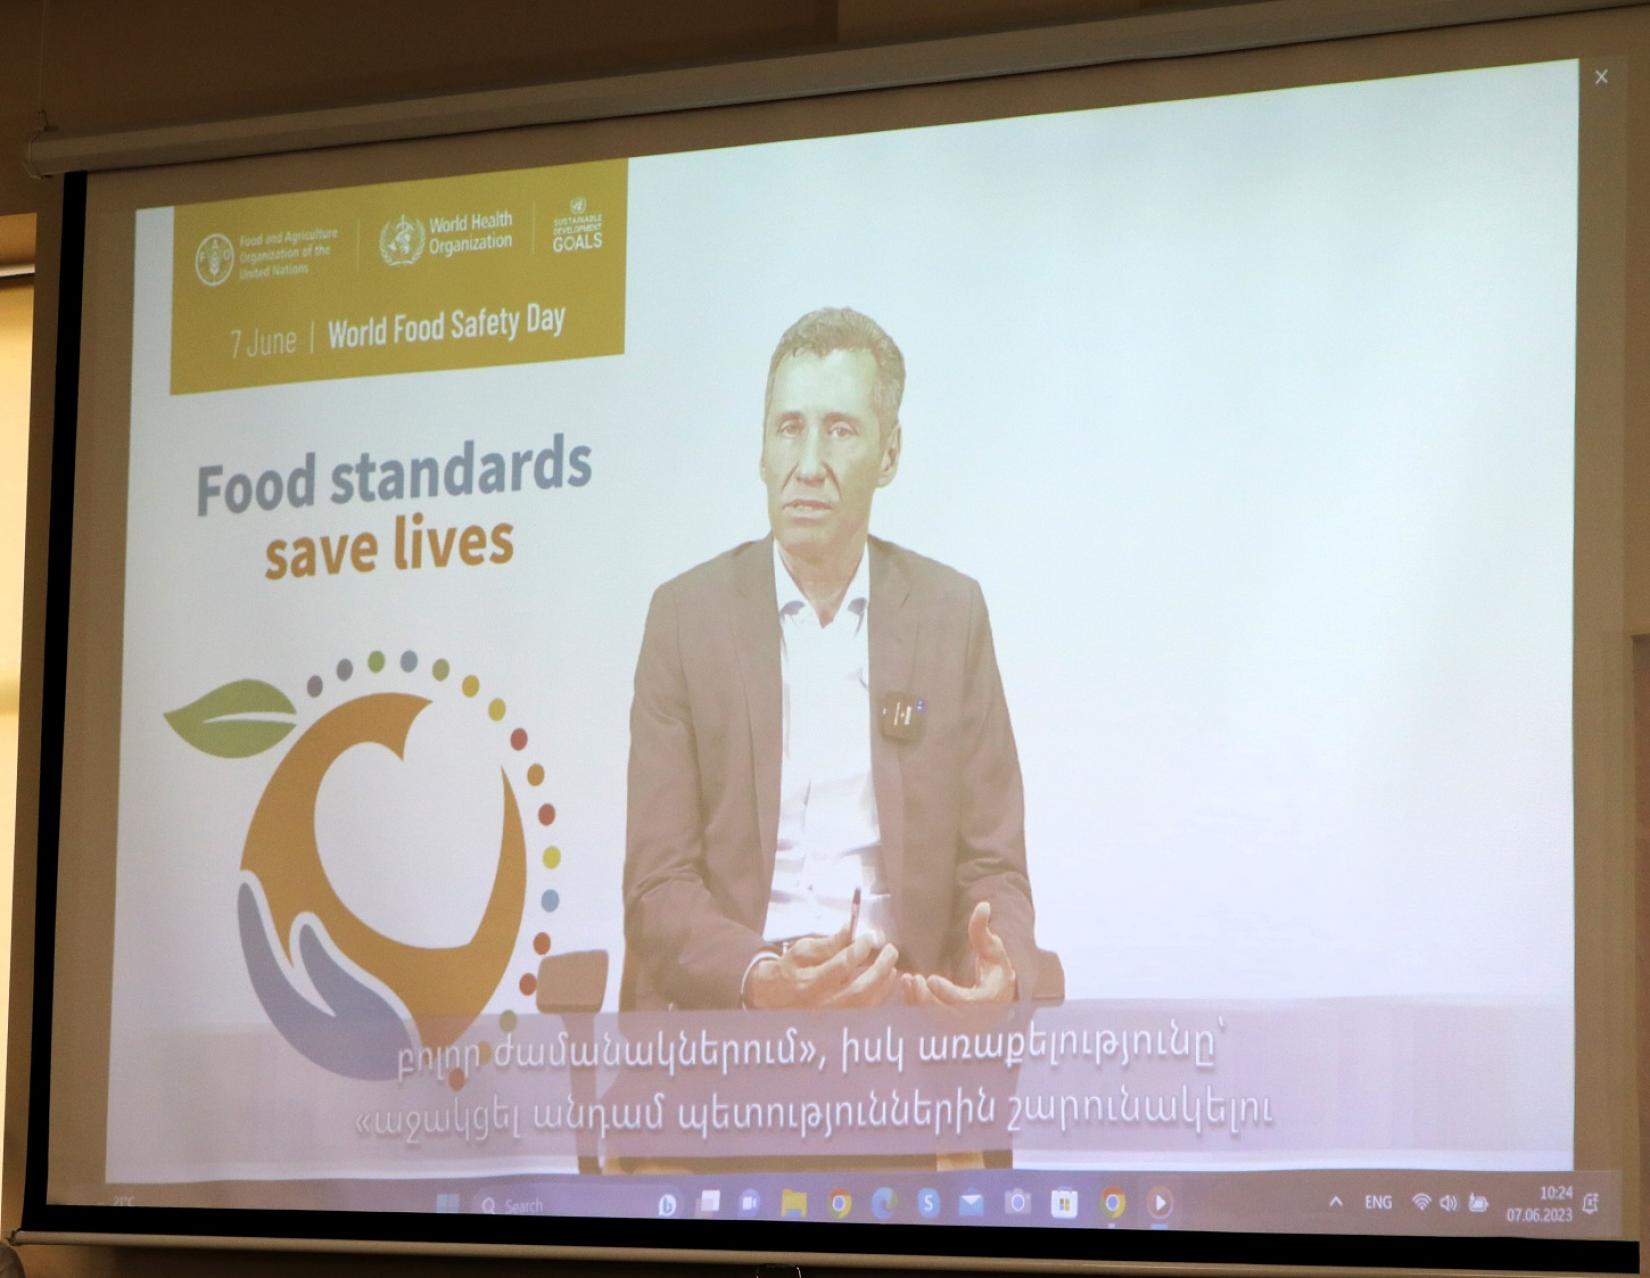 A screen photo of a male FAO Representative delivering a speech on World Food Safety Day.